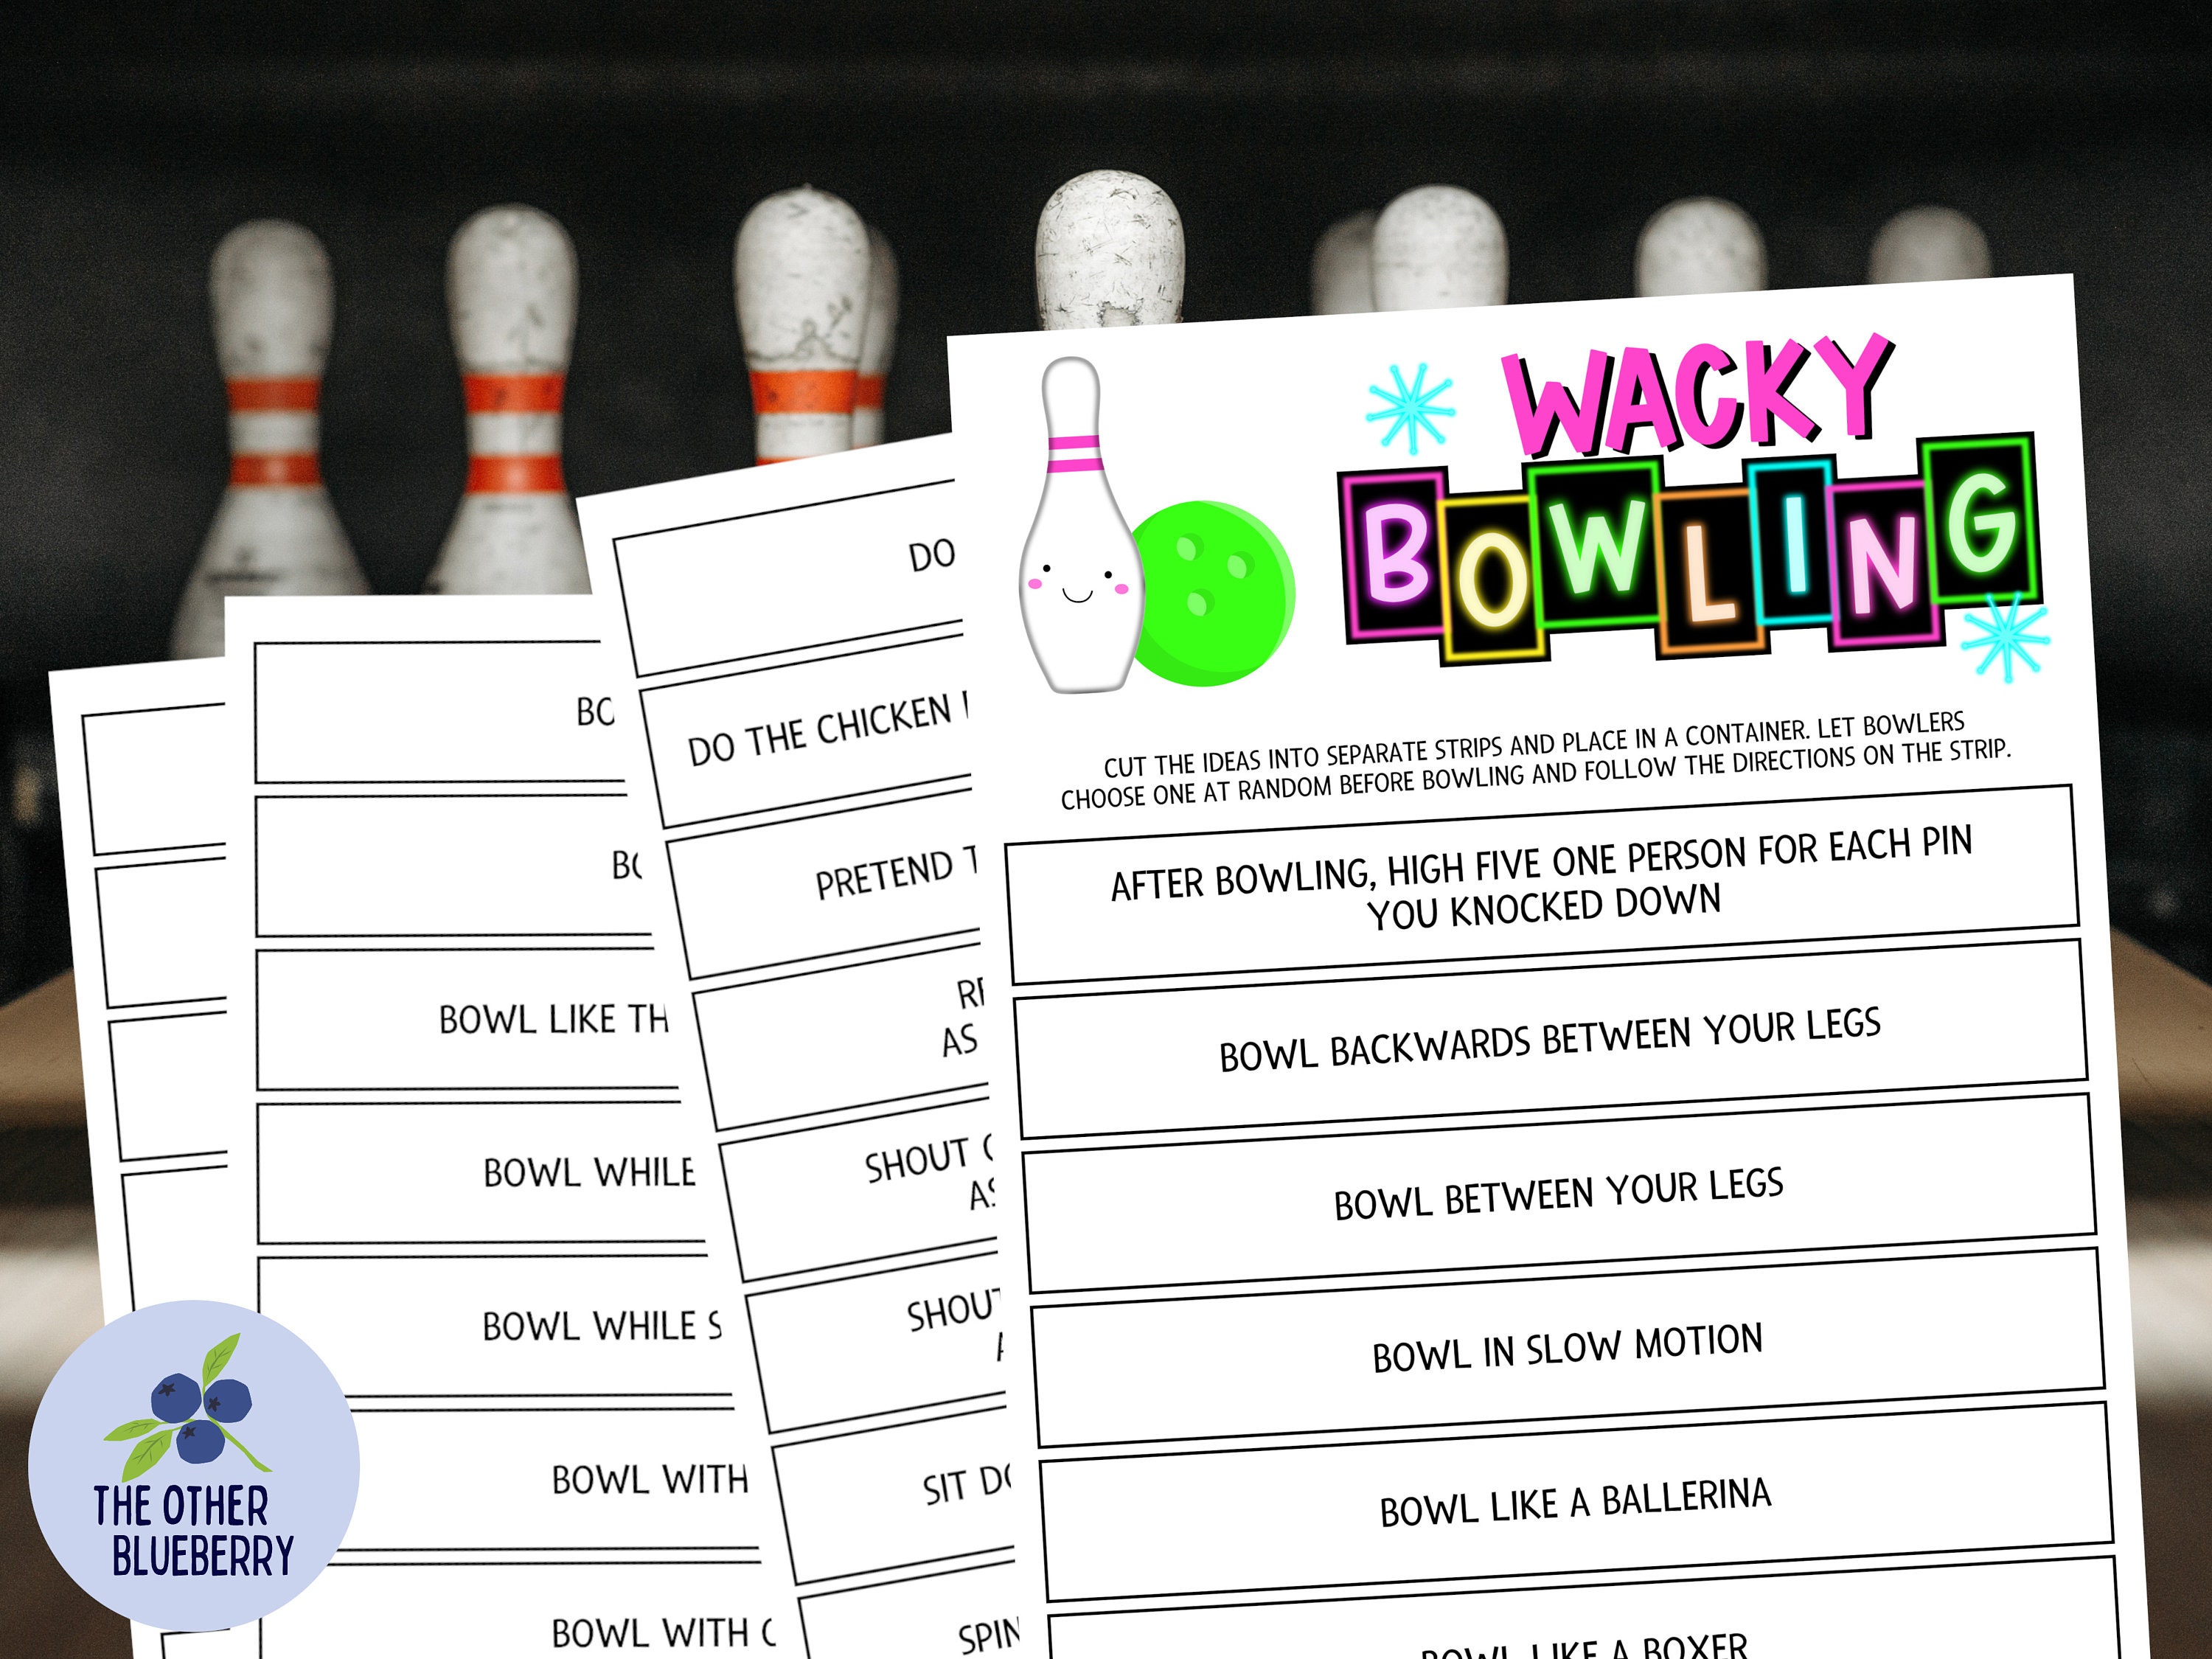 WCC bowling tips: How to win the game with bowling